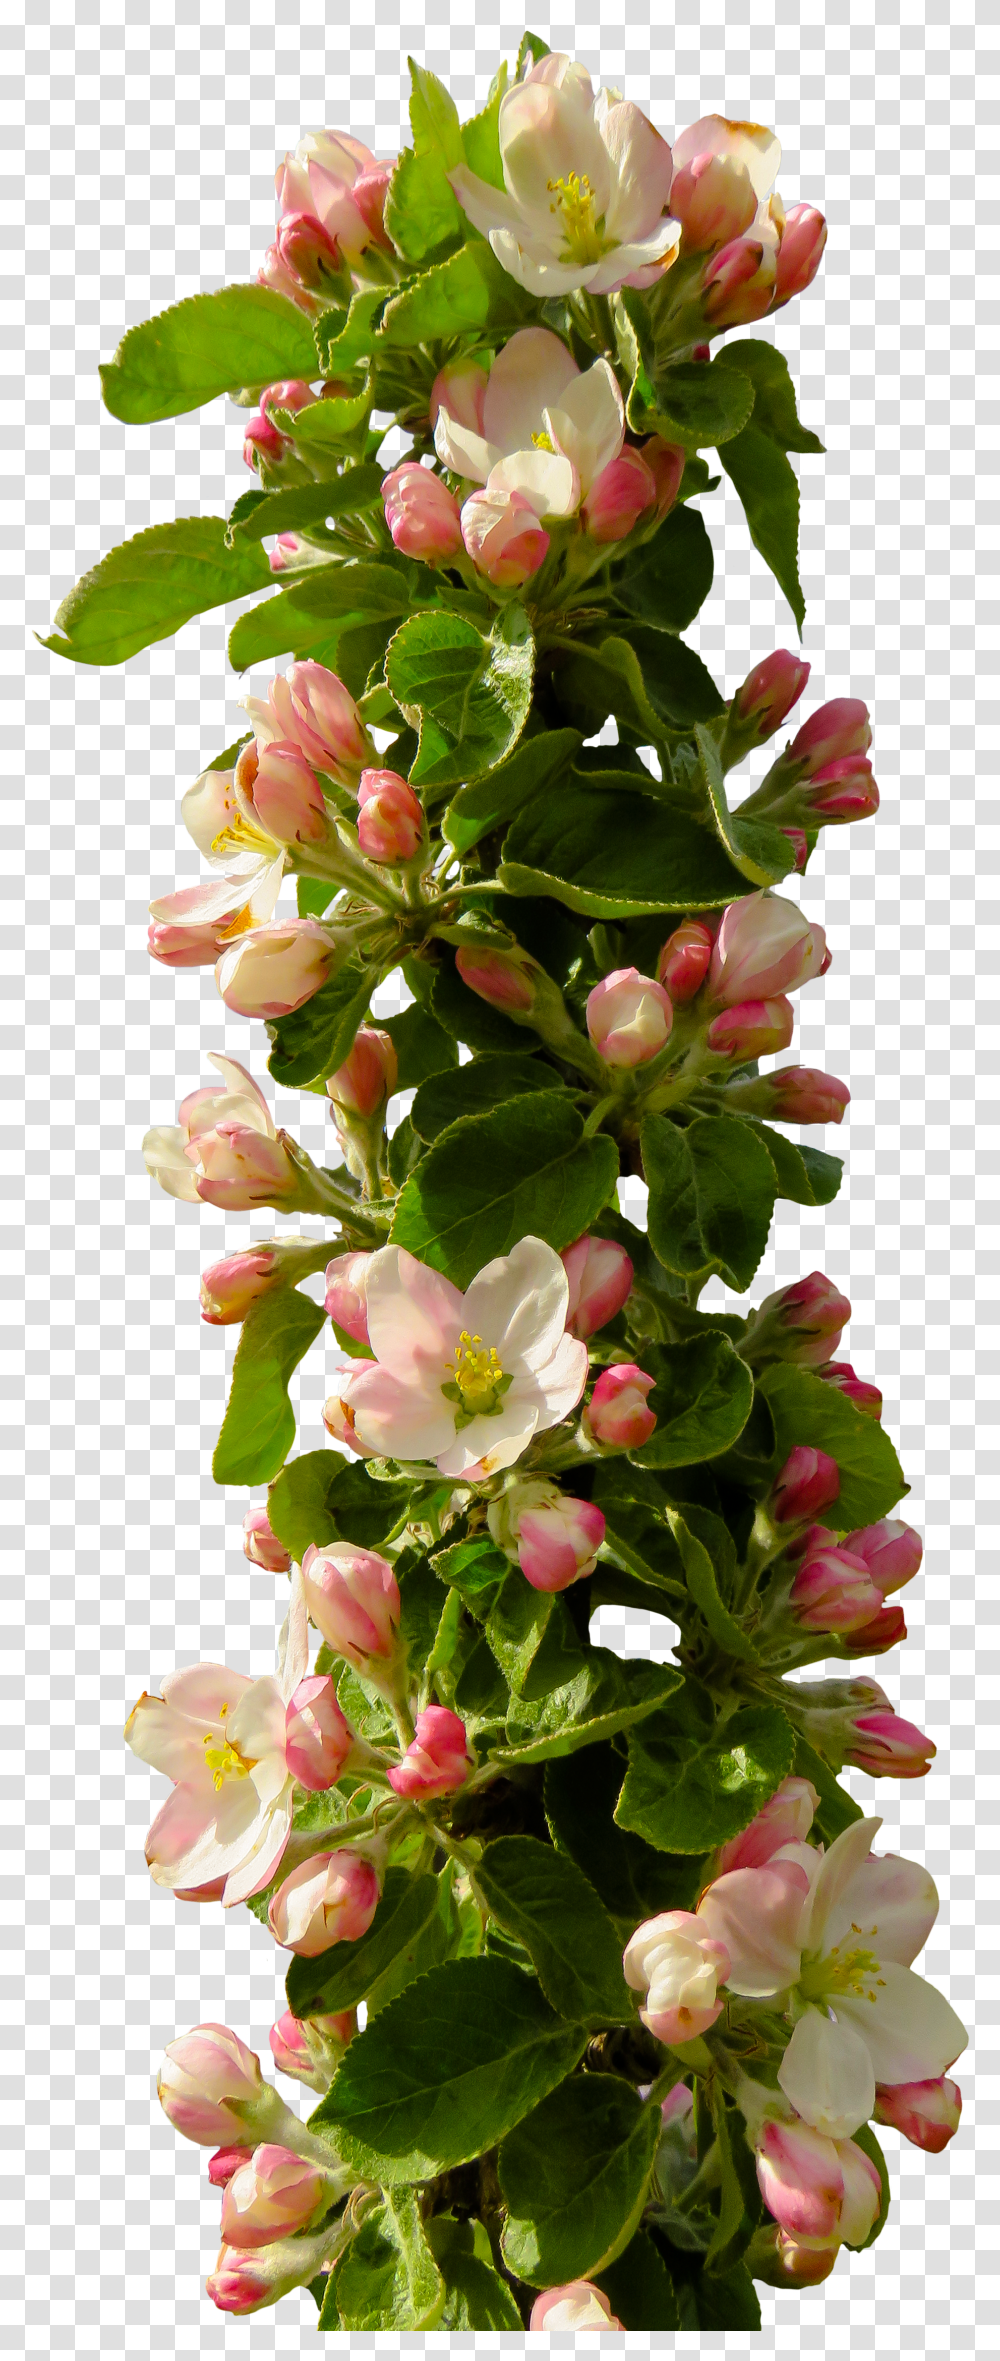 Isolated Apple Tree Flowering Branch Free Image Portable Network Graphics Transparent Png